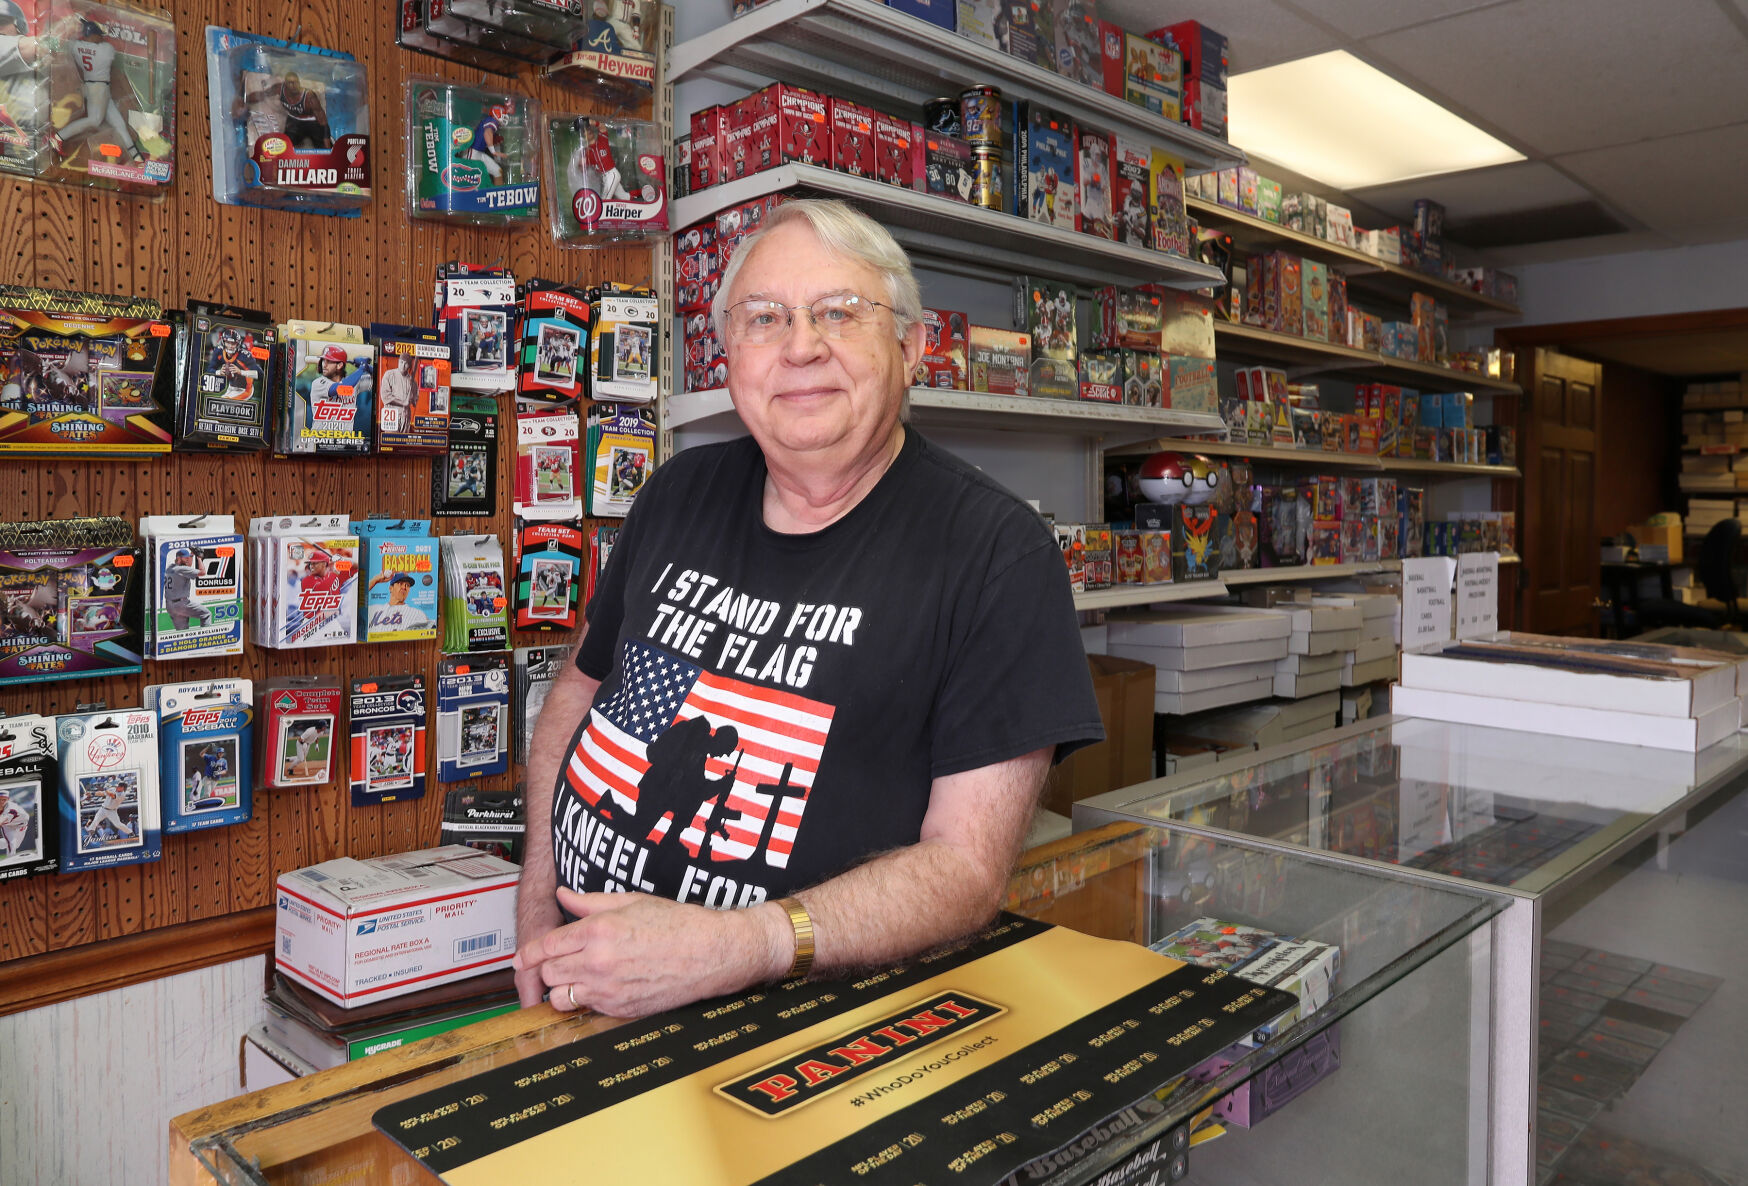 Tri-State Baseball Cards owner Dave Orr displays some of the many cards and collectibles available in his store in 2021.    PHOTO CREDIT: Stephen Gassman